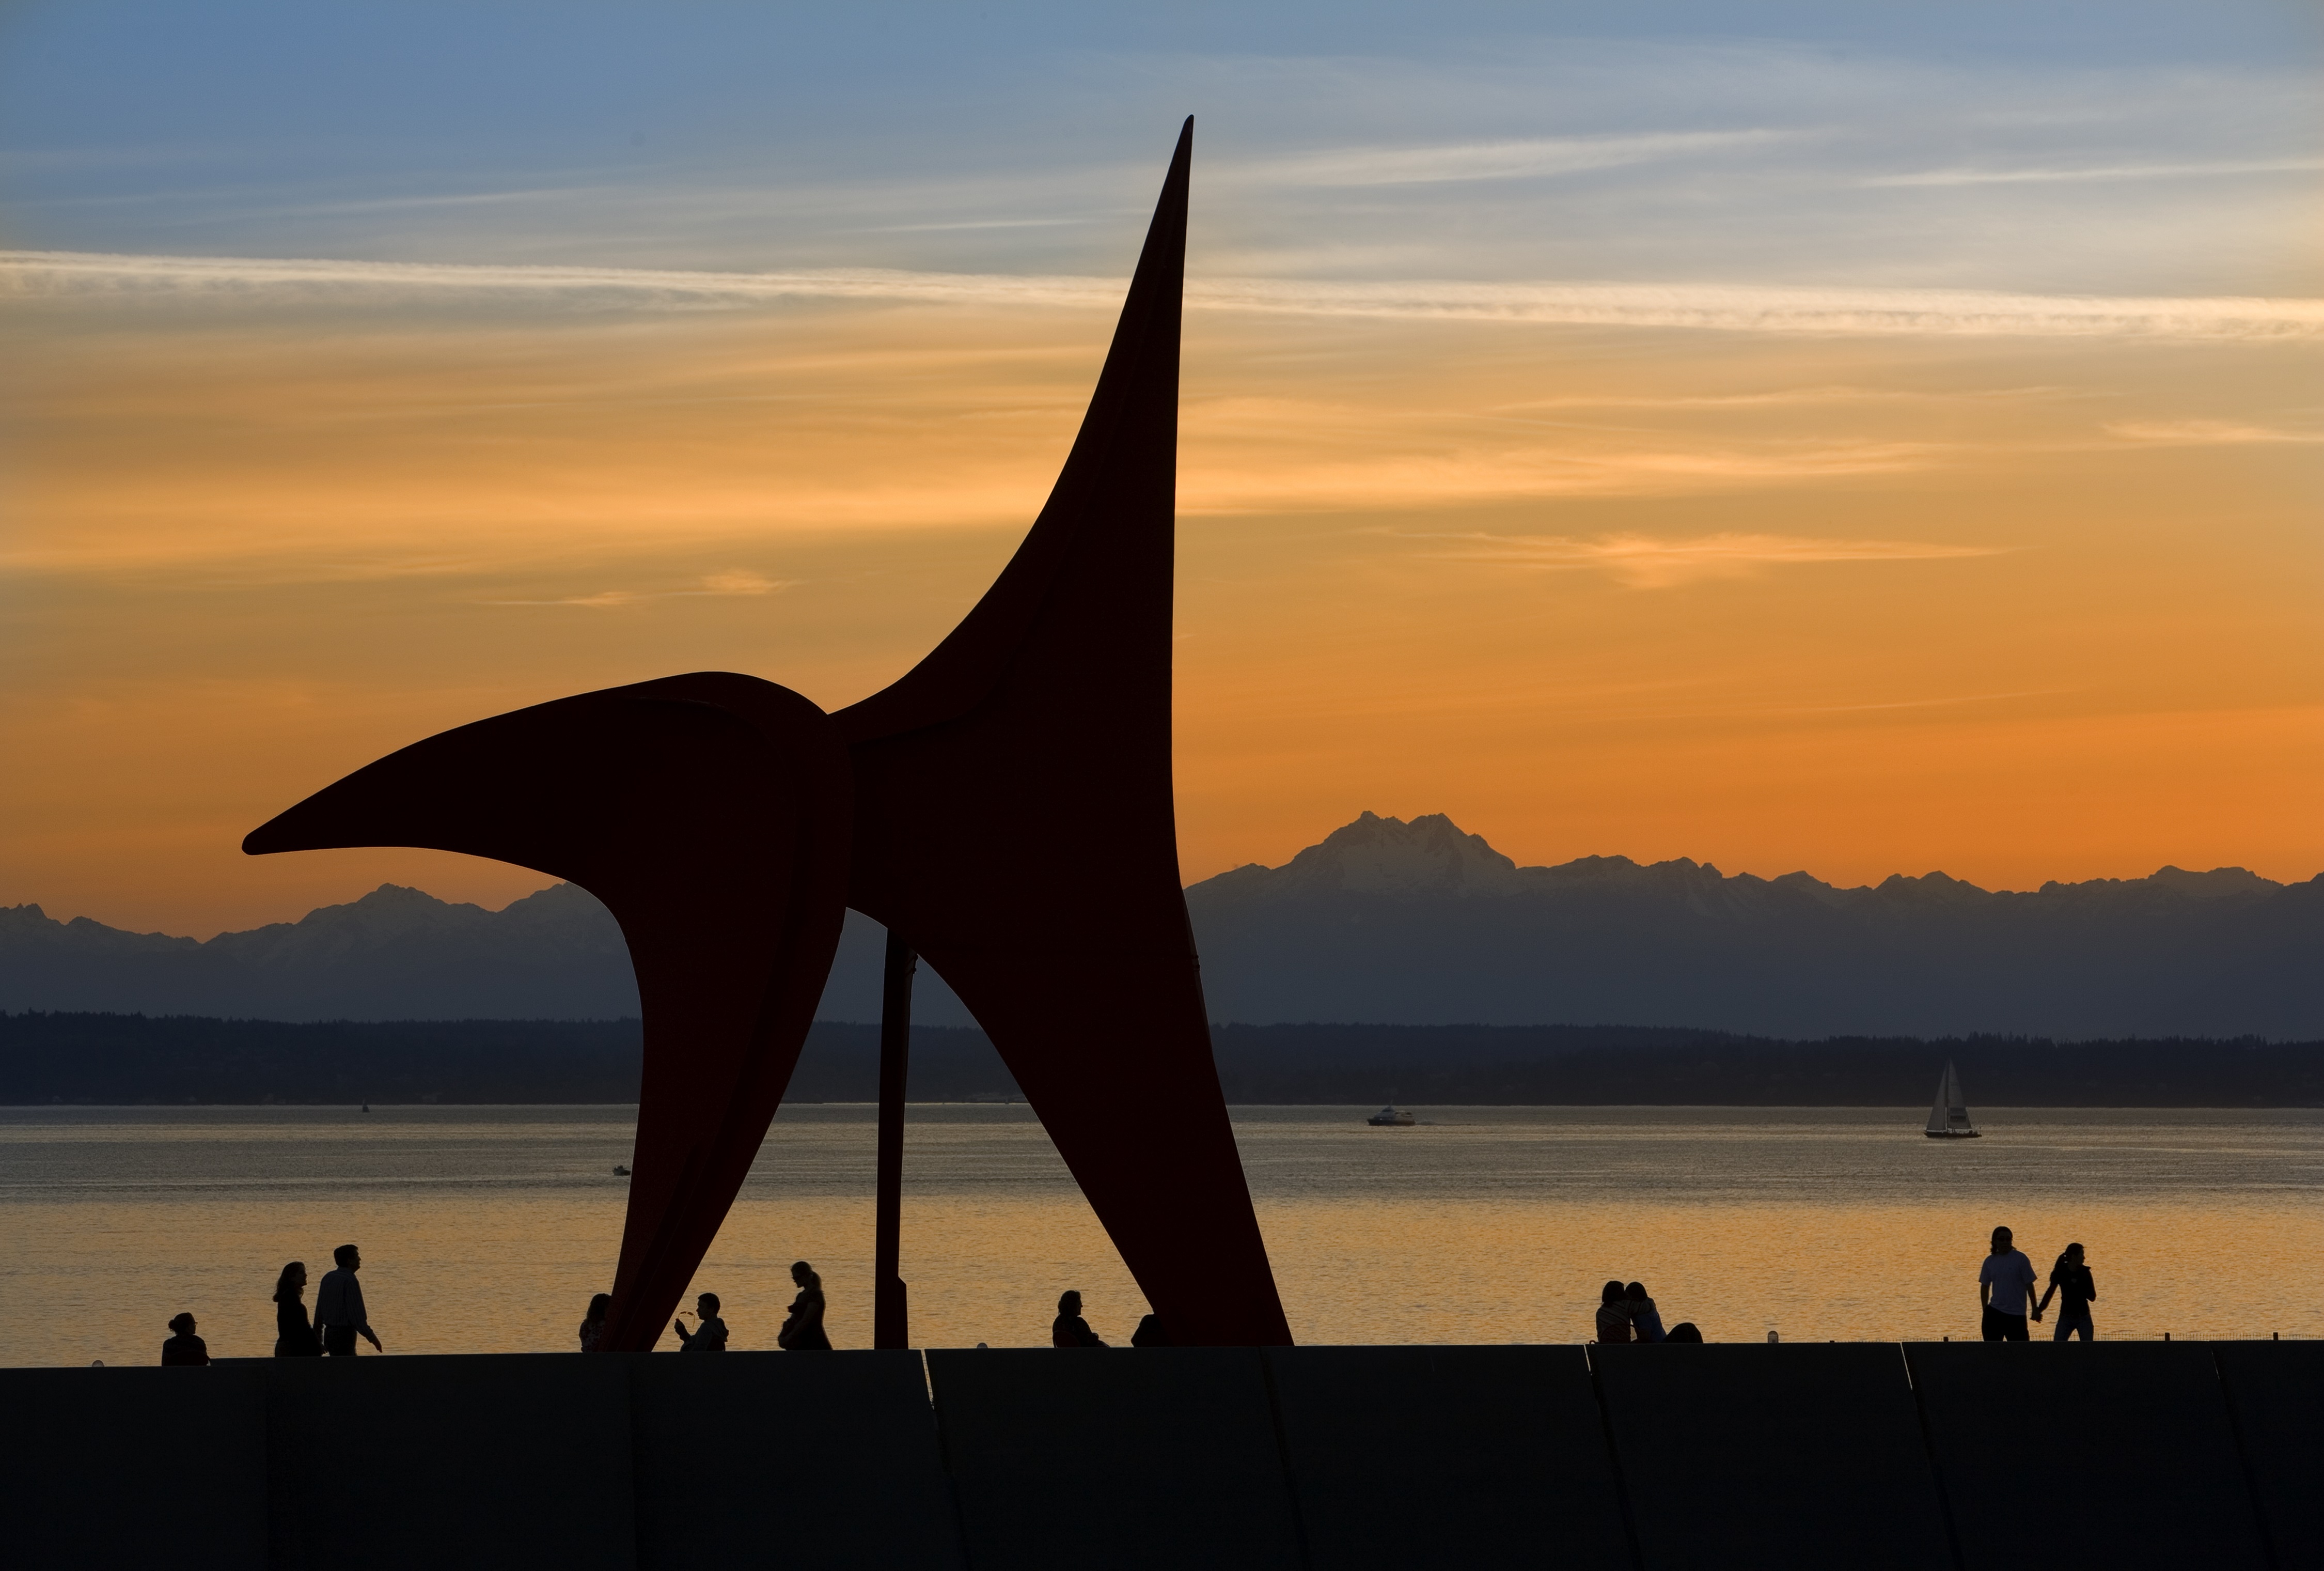 Courtesy Olympic Sculpture Park